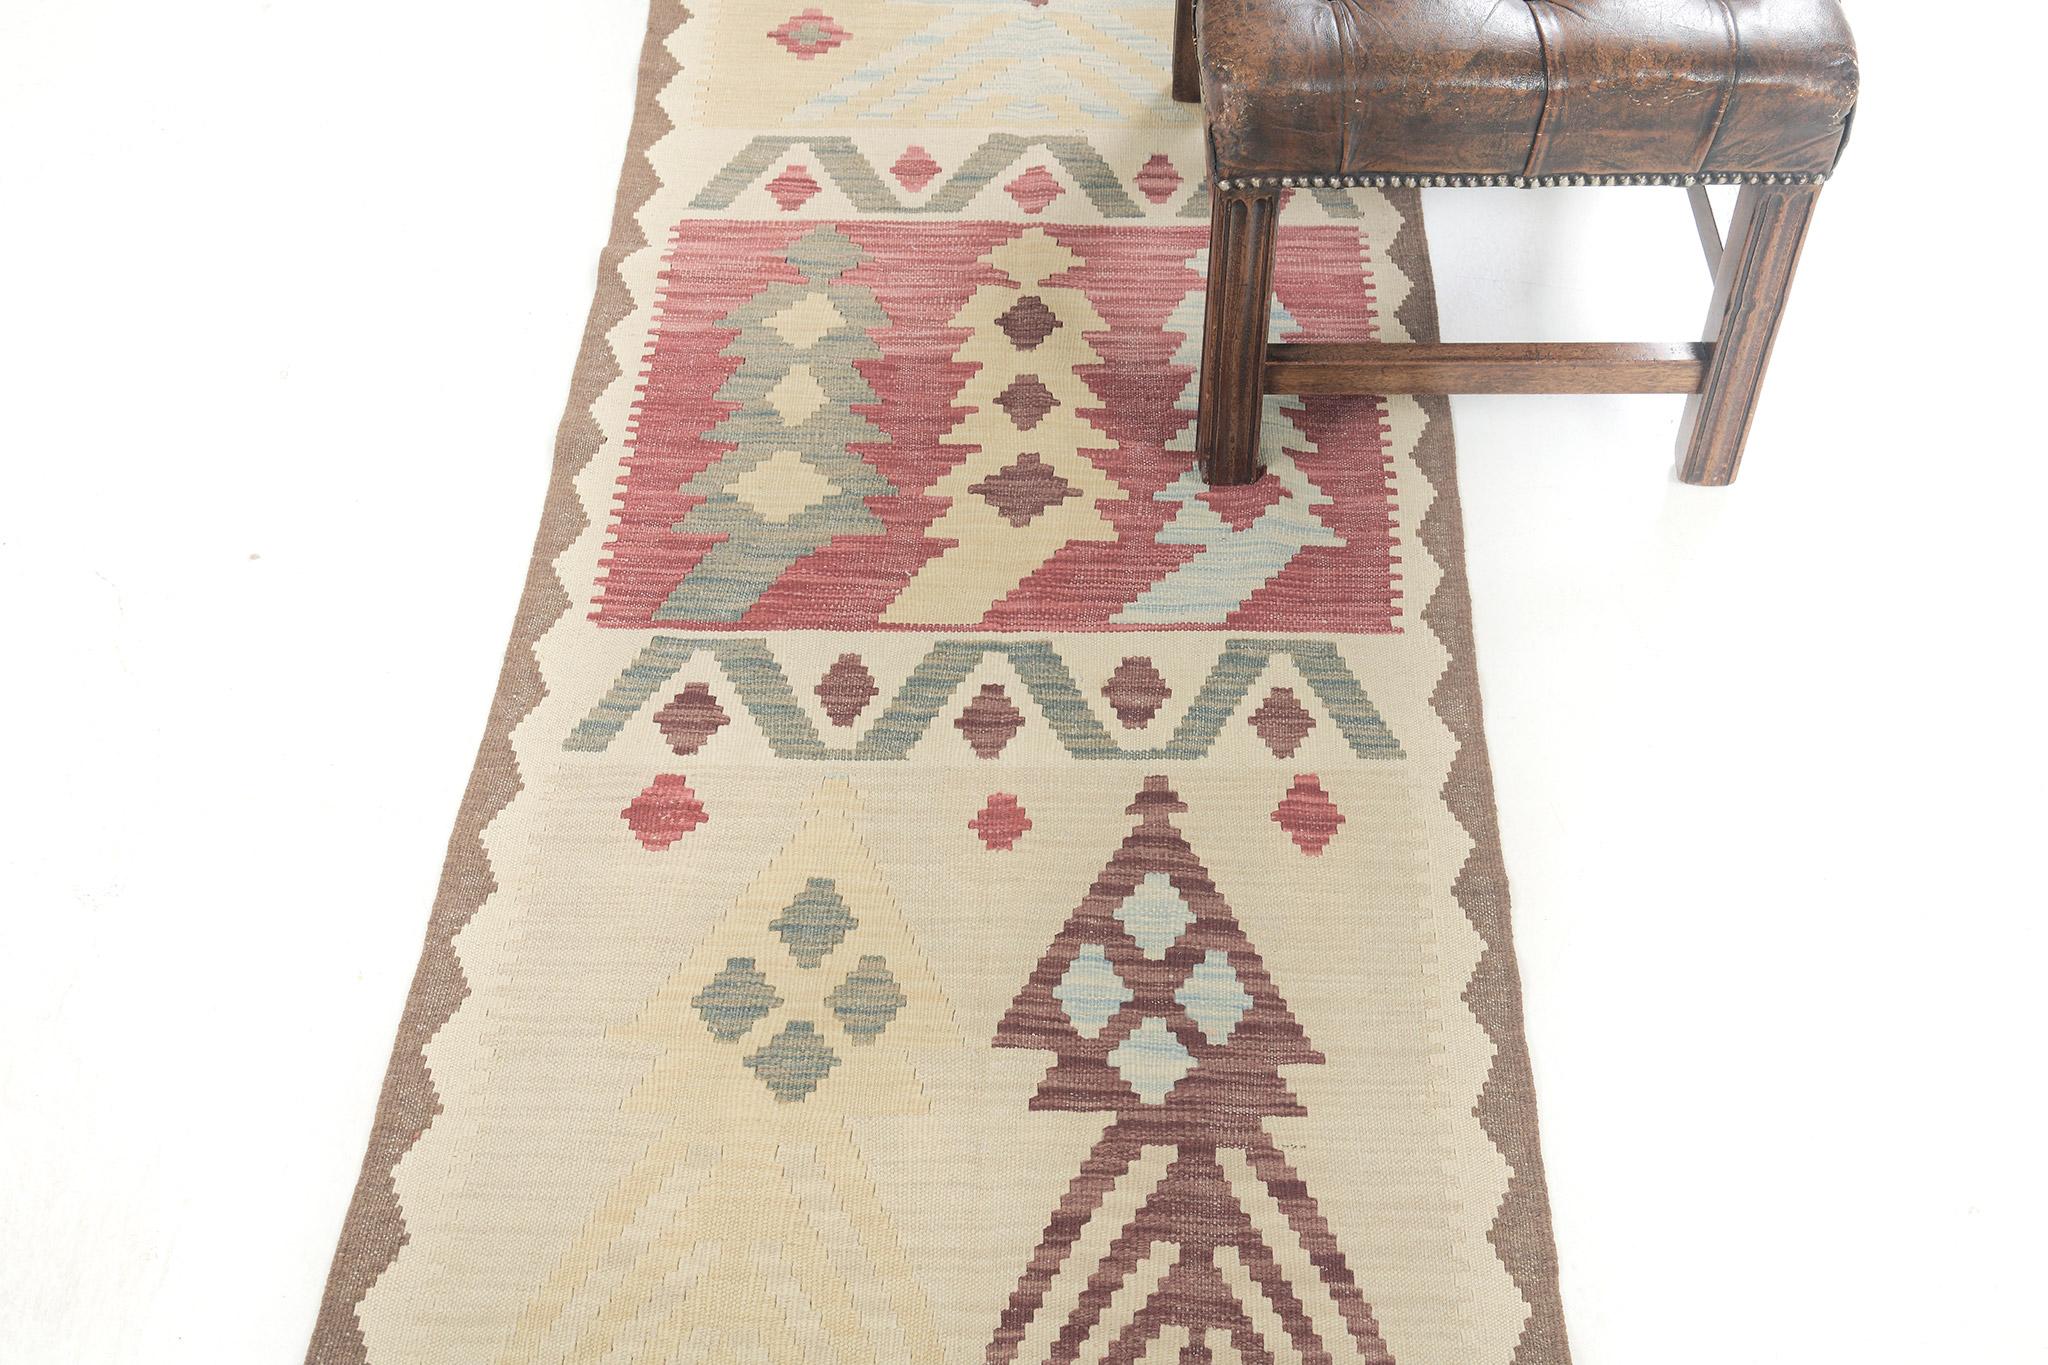 Our natural dyed flatweave Kilim in vintage style rug is inspired by tribal patterns. This Kilim is a deal for flooring or wall applications. It is adorned with motifs and tribal symbols and surrounded by zigzag patterns that make this rug loved by